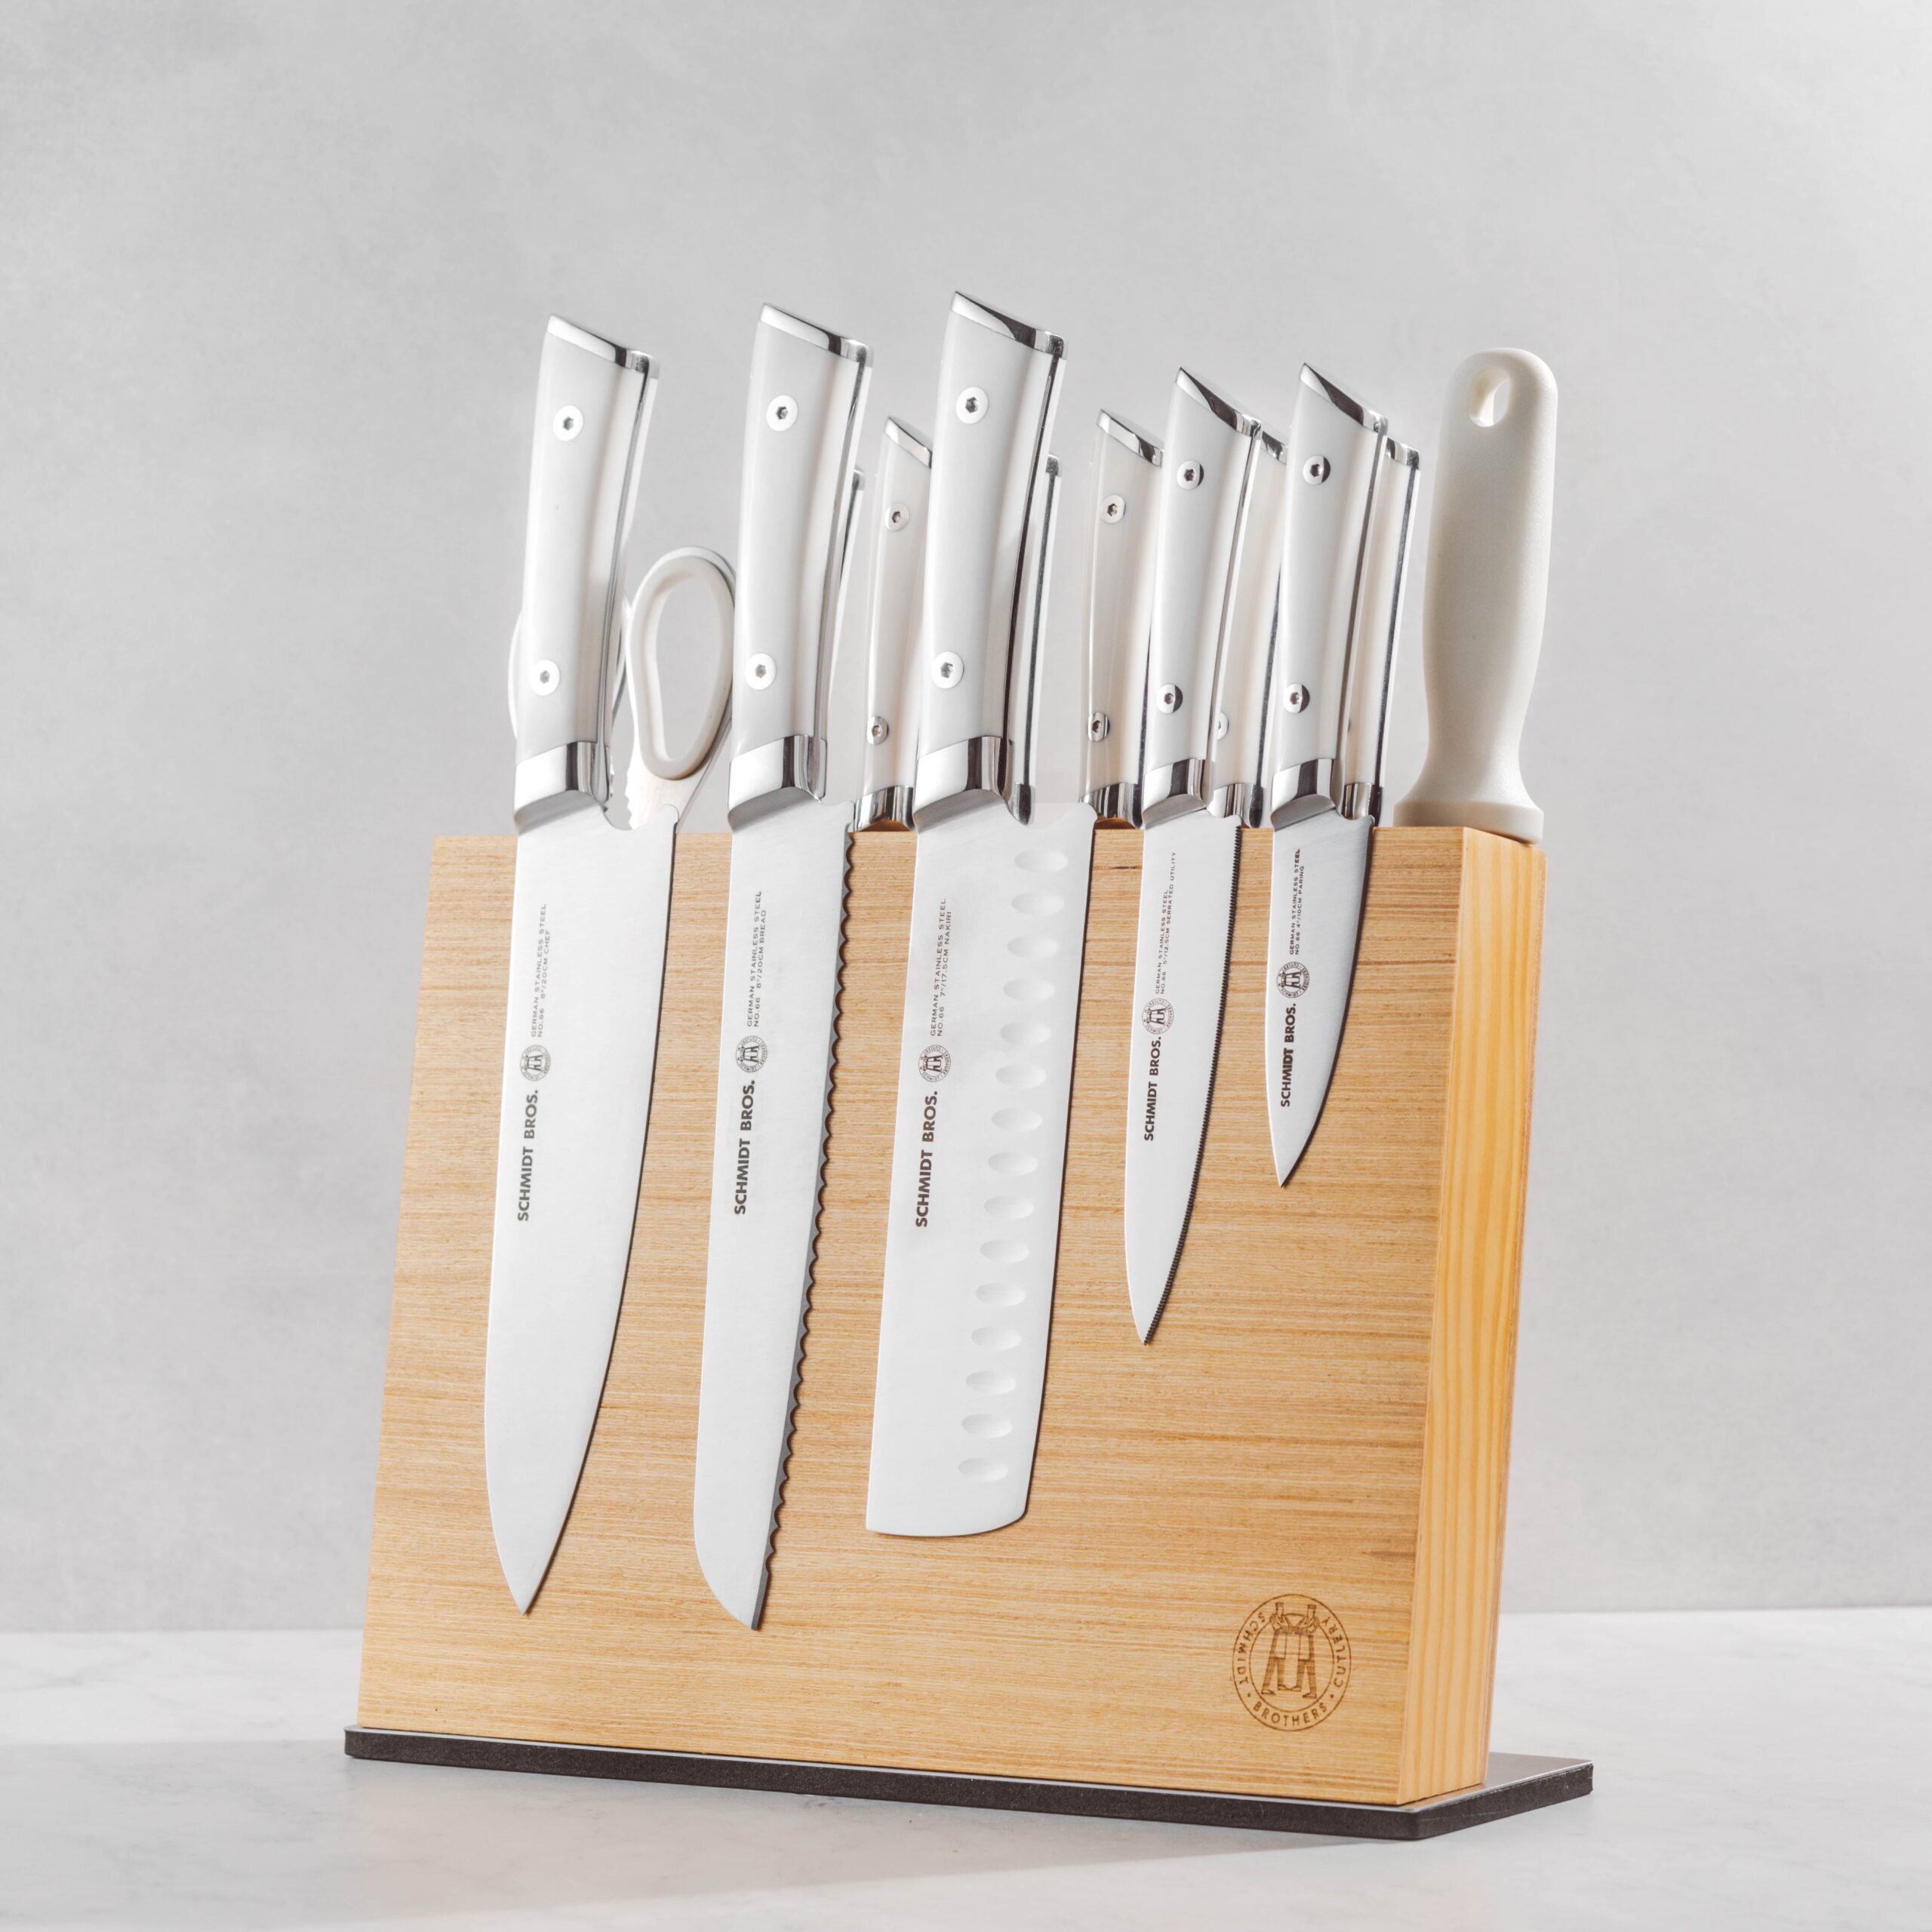 https://bigbigmart.com/wp-content/uploads/2023/12/Schmidt-Brothers-Cutlery-14-Piece-Professional-Series-Forged-Stainless-Steel-Knife-Block-Set-White-Handles_4e700bdc-ace4-41ba-a498-9c2065744b27.3e21eb60c897dc6e69a303ccaf840a32-scaled.jpeg